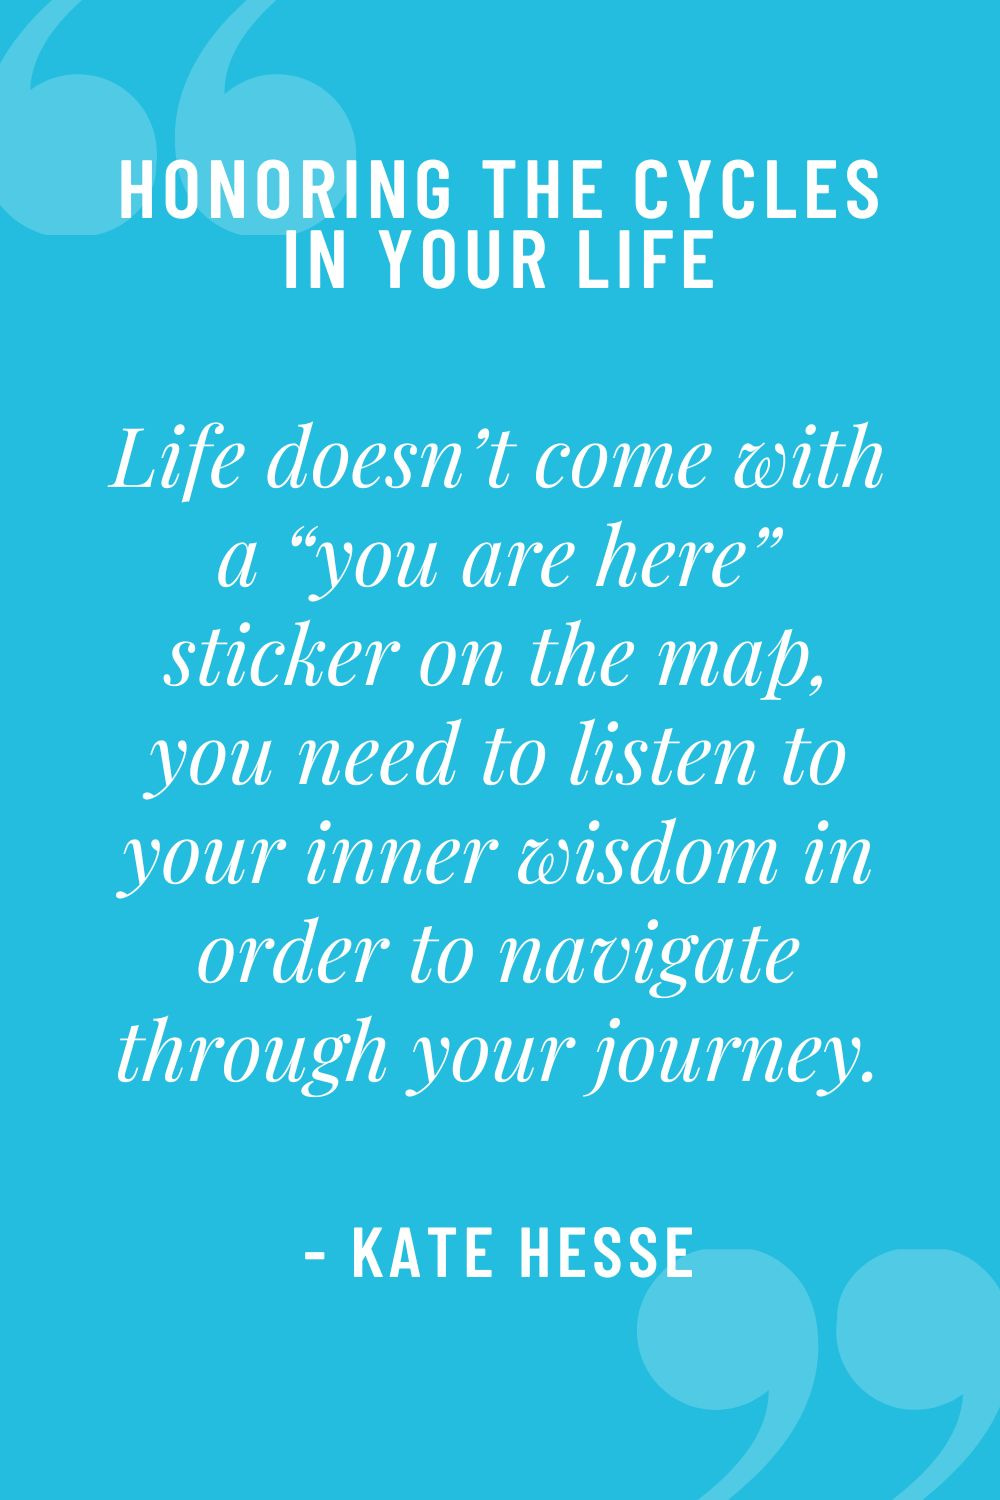 Life doesn't come with a "you are here" sticker on the map, you need to listen to your inner wisdom in order to navigate through your journey.